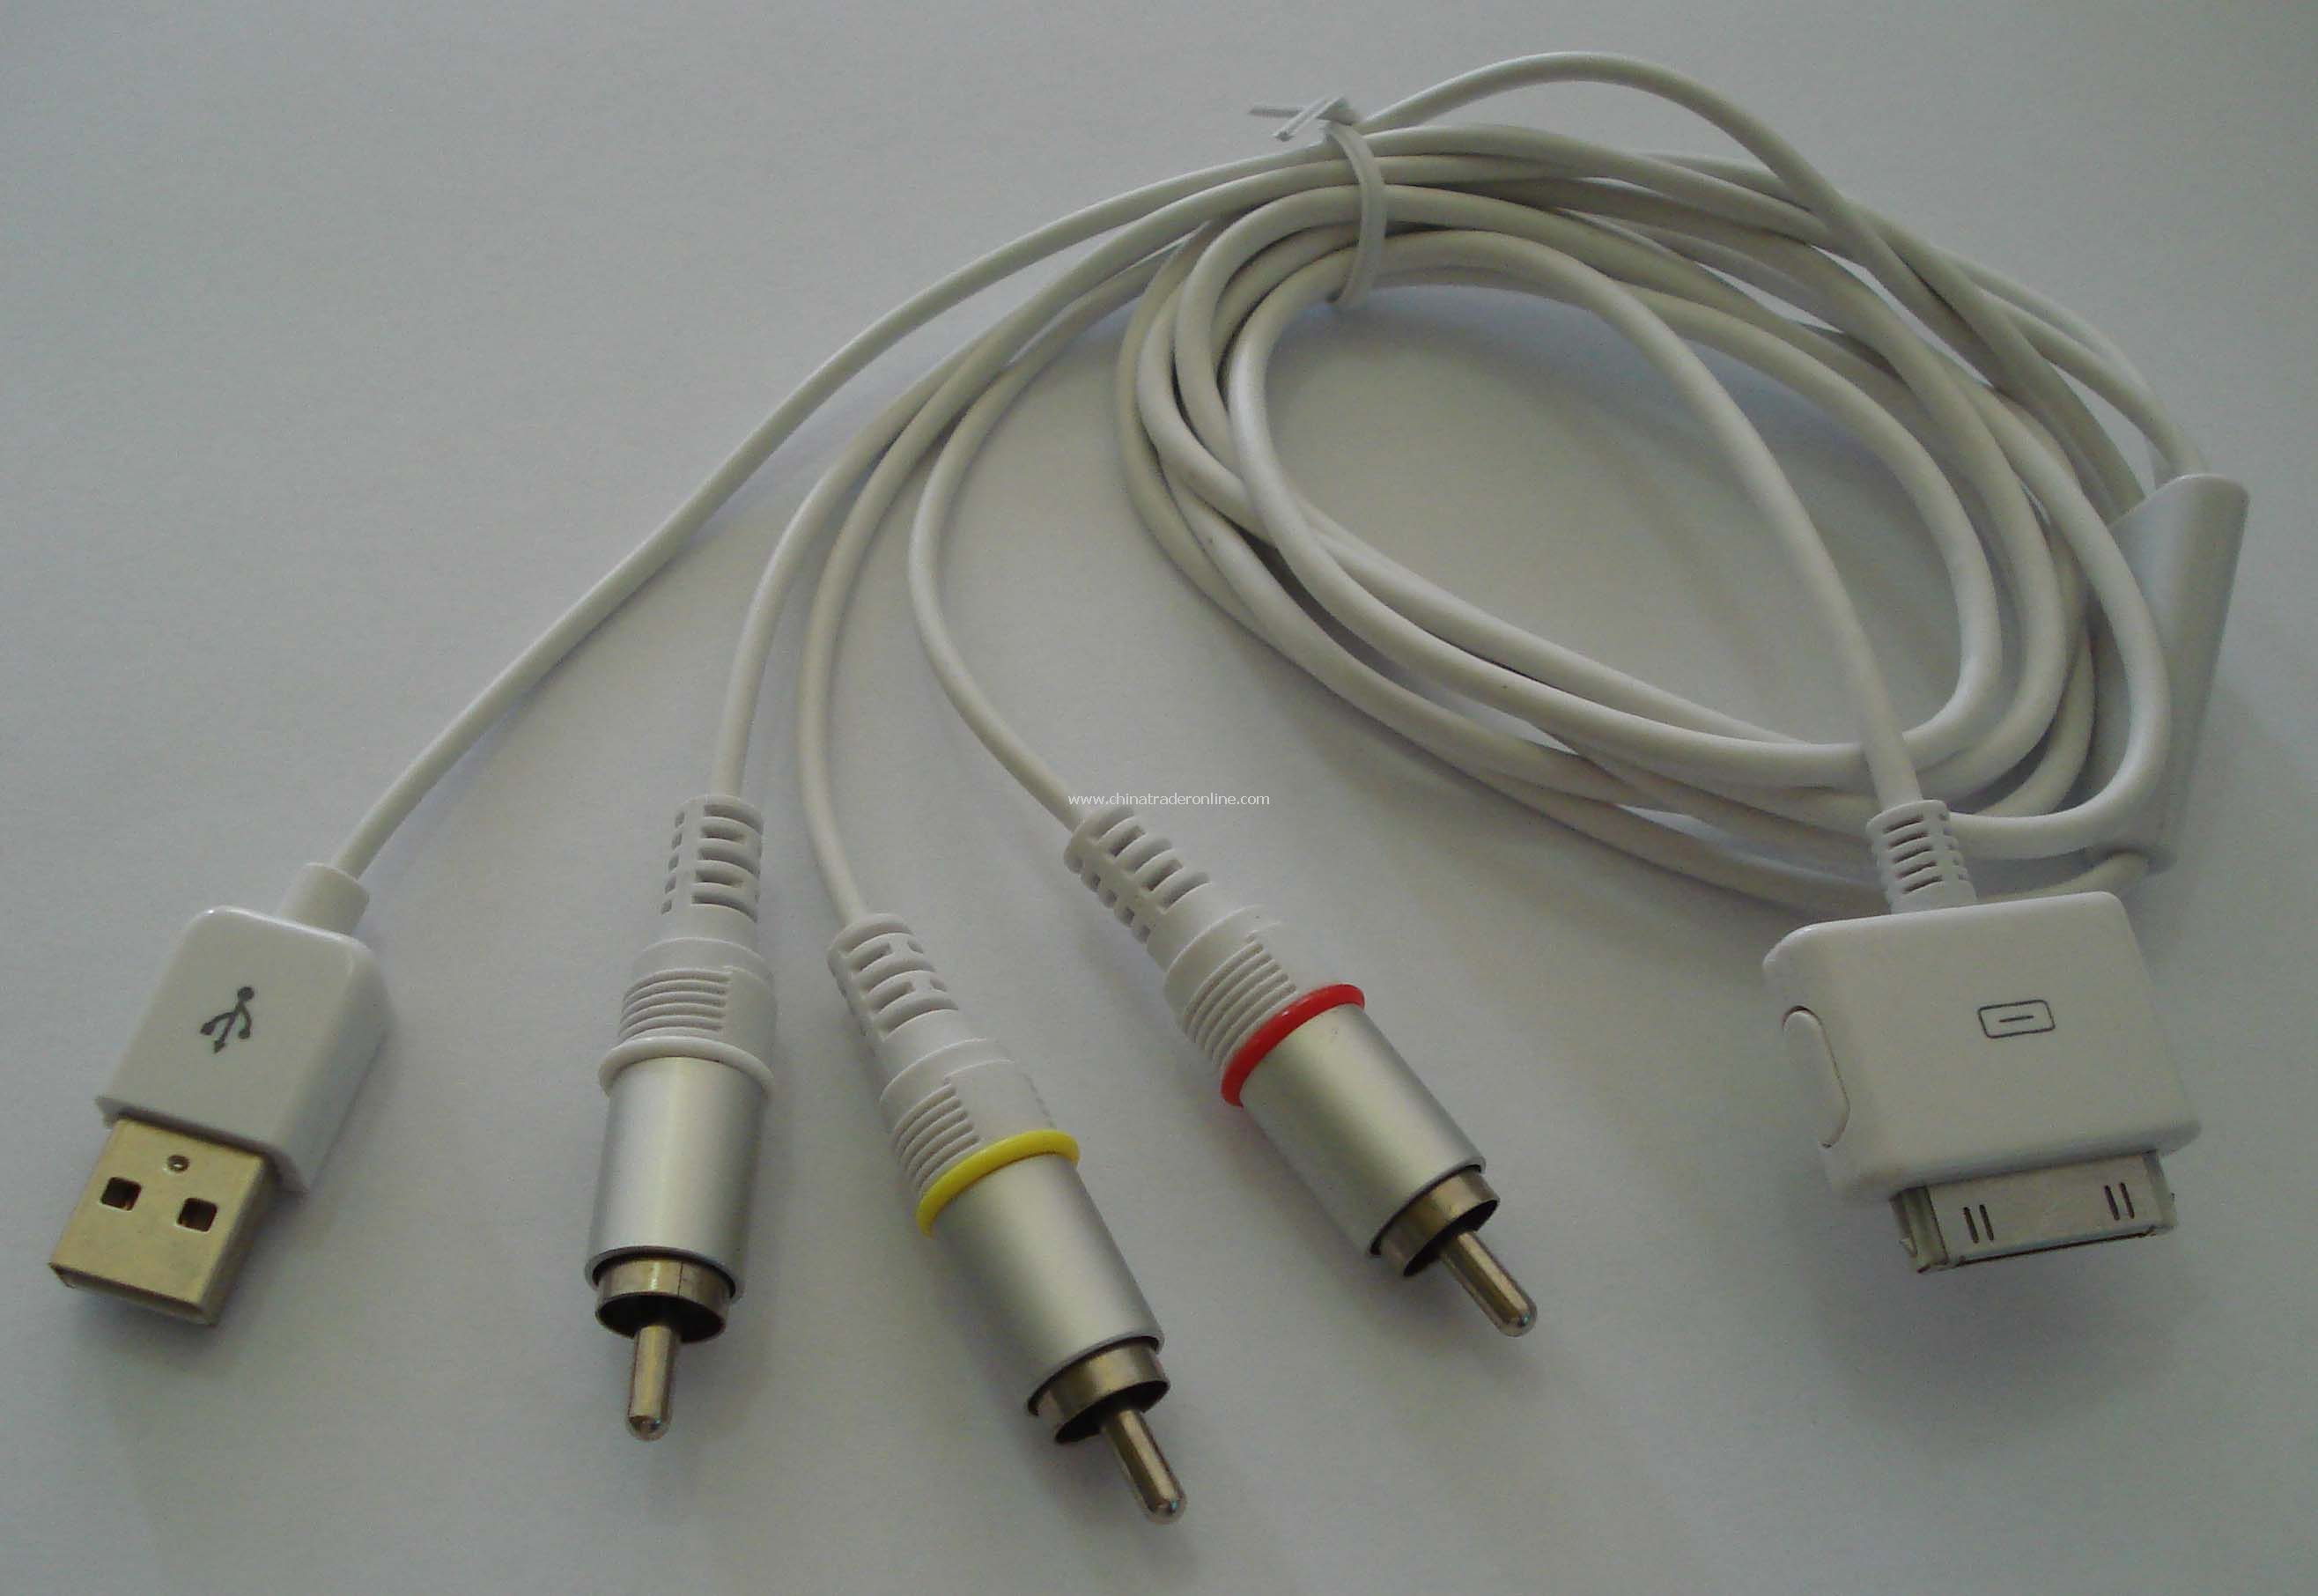 USB & AV Cable for iPhone iPod from China